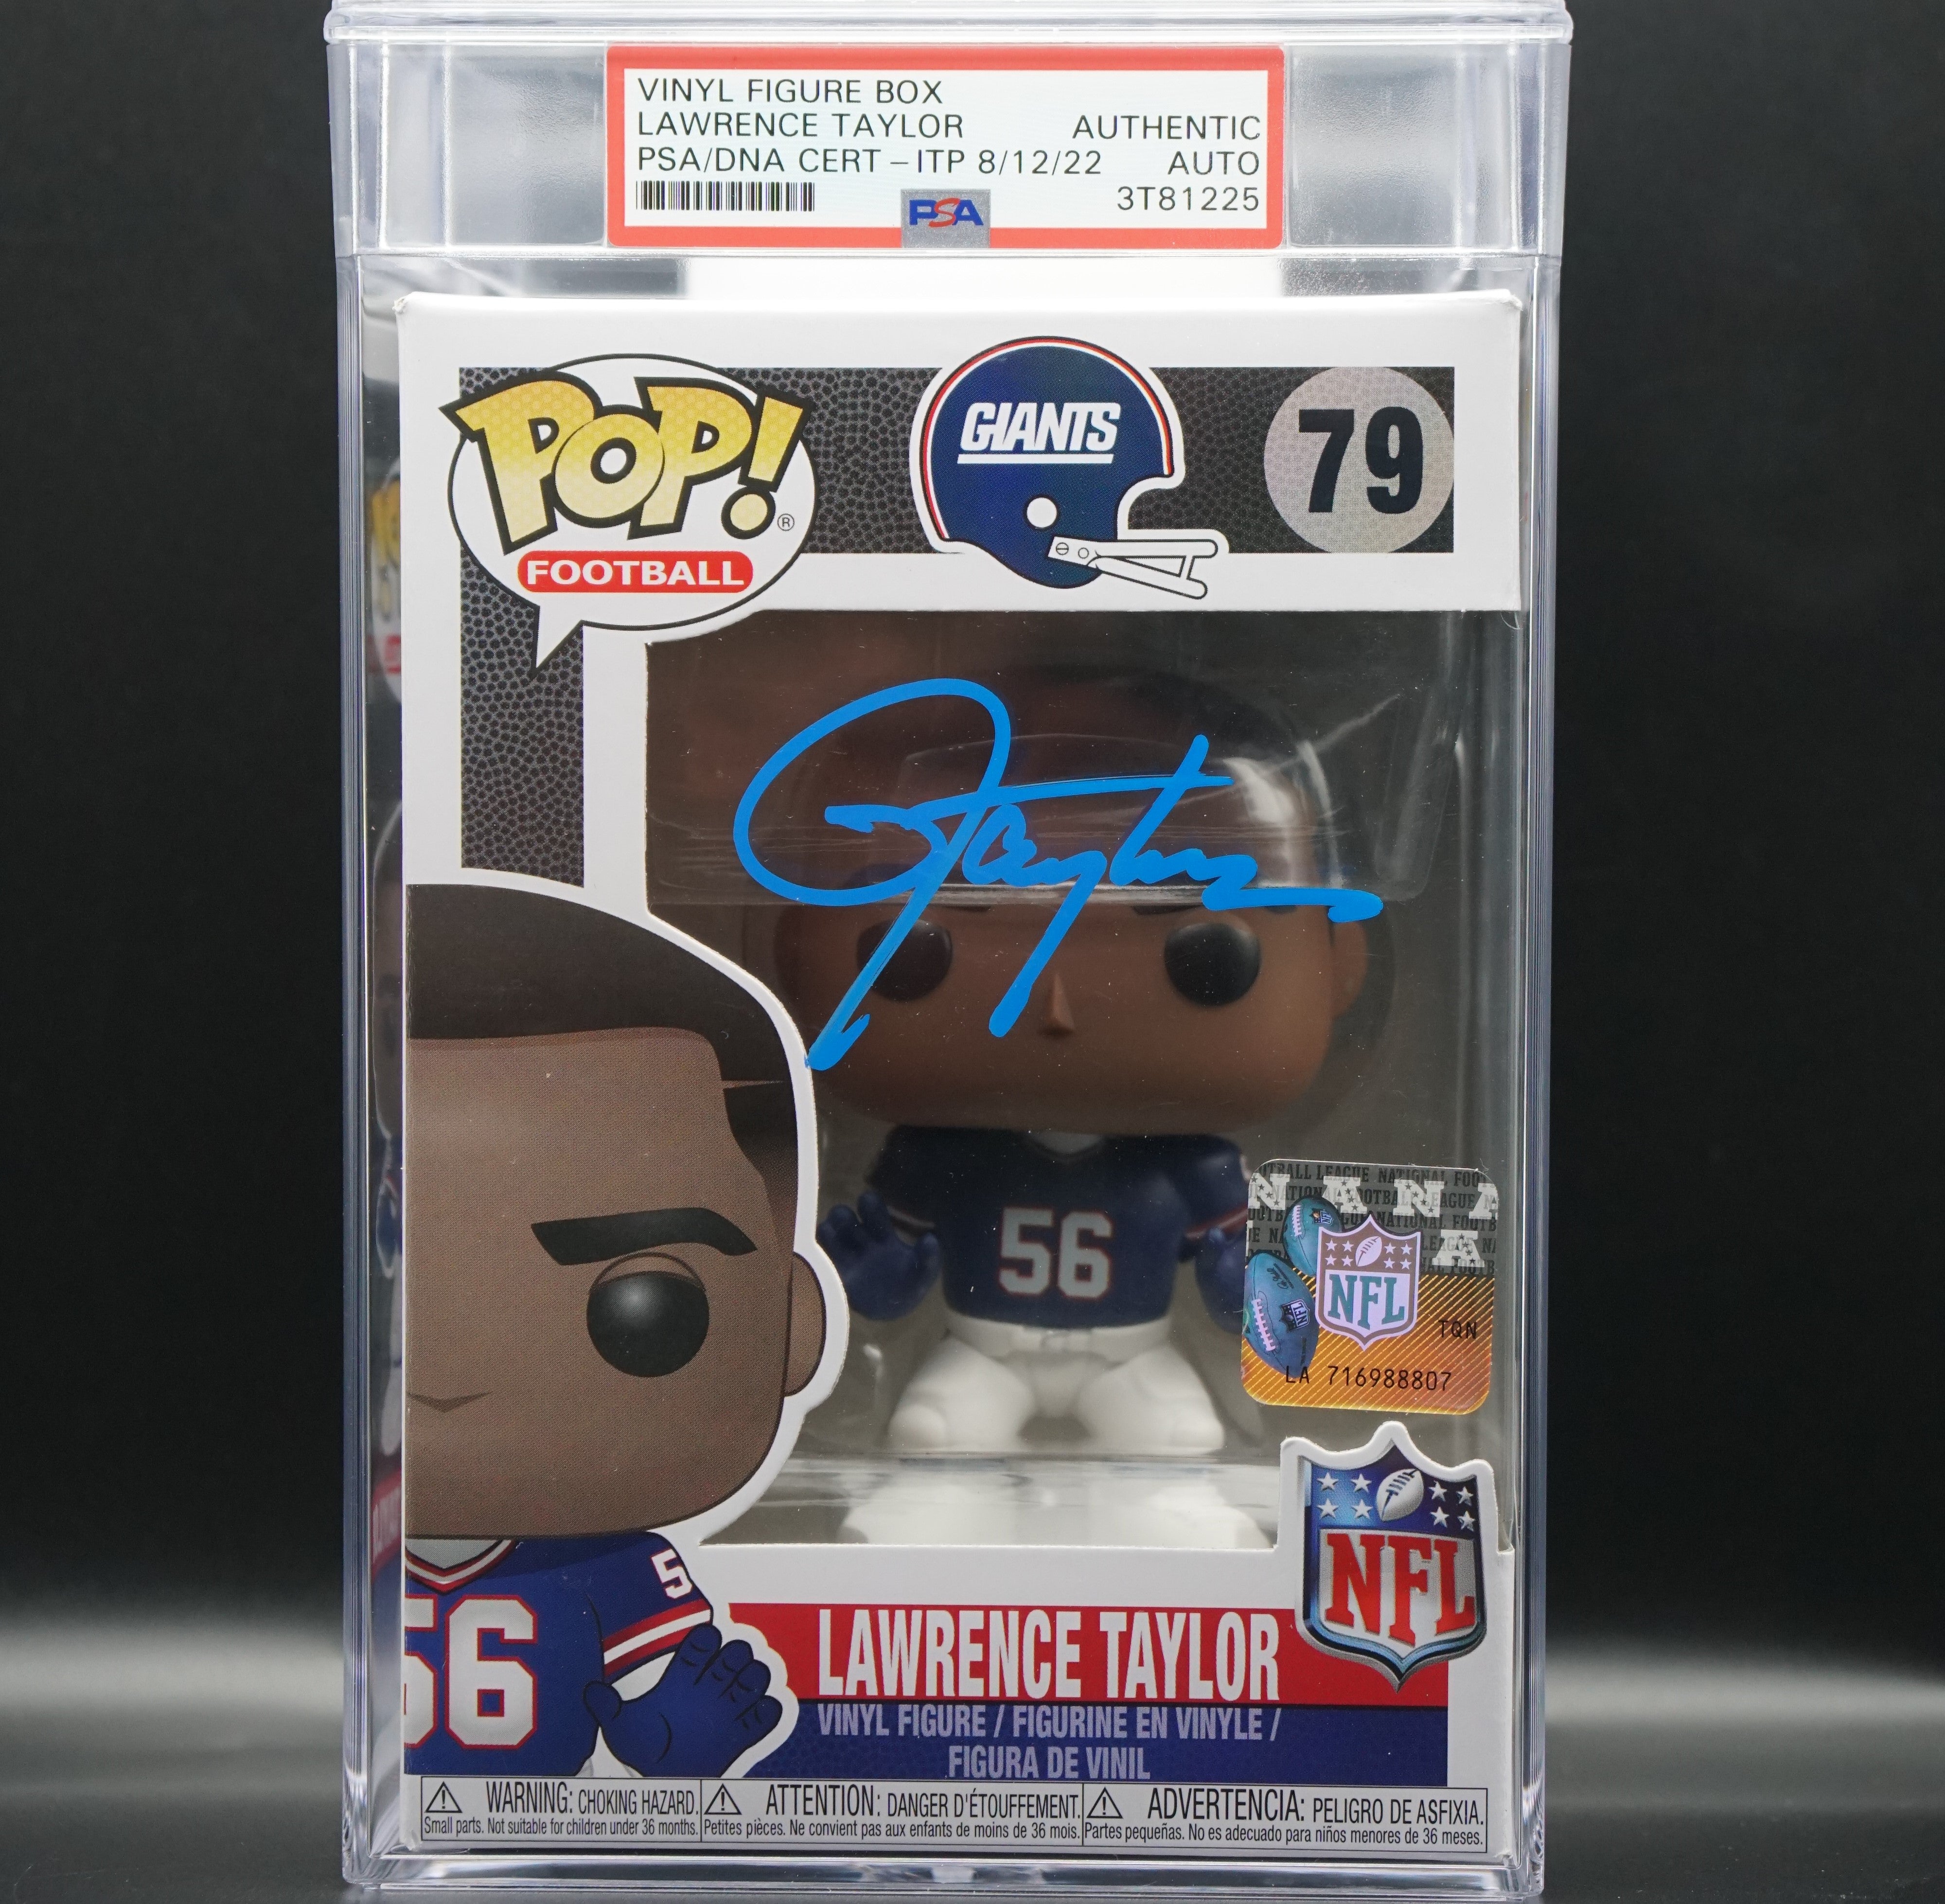 NY Giants Funko Pop #79 Encapsulated Lawrence Taylor PSA COA - Signed by Lawrence Taylor